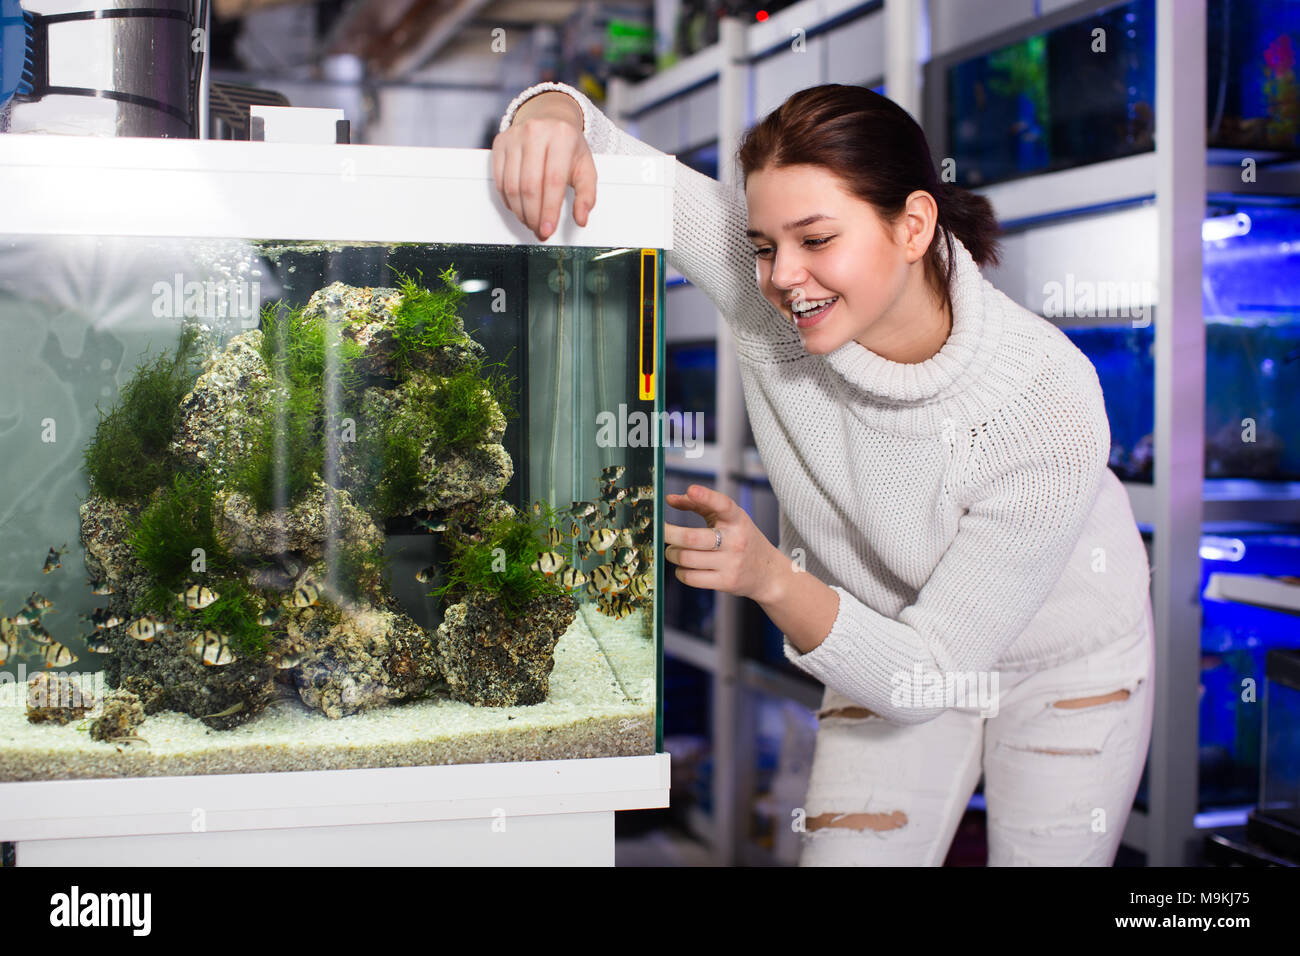 Smiling teenage girl is looking at striped and colorful fishes in aquarium with rocks and algae. Stock Photo